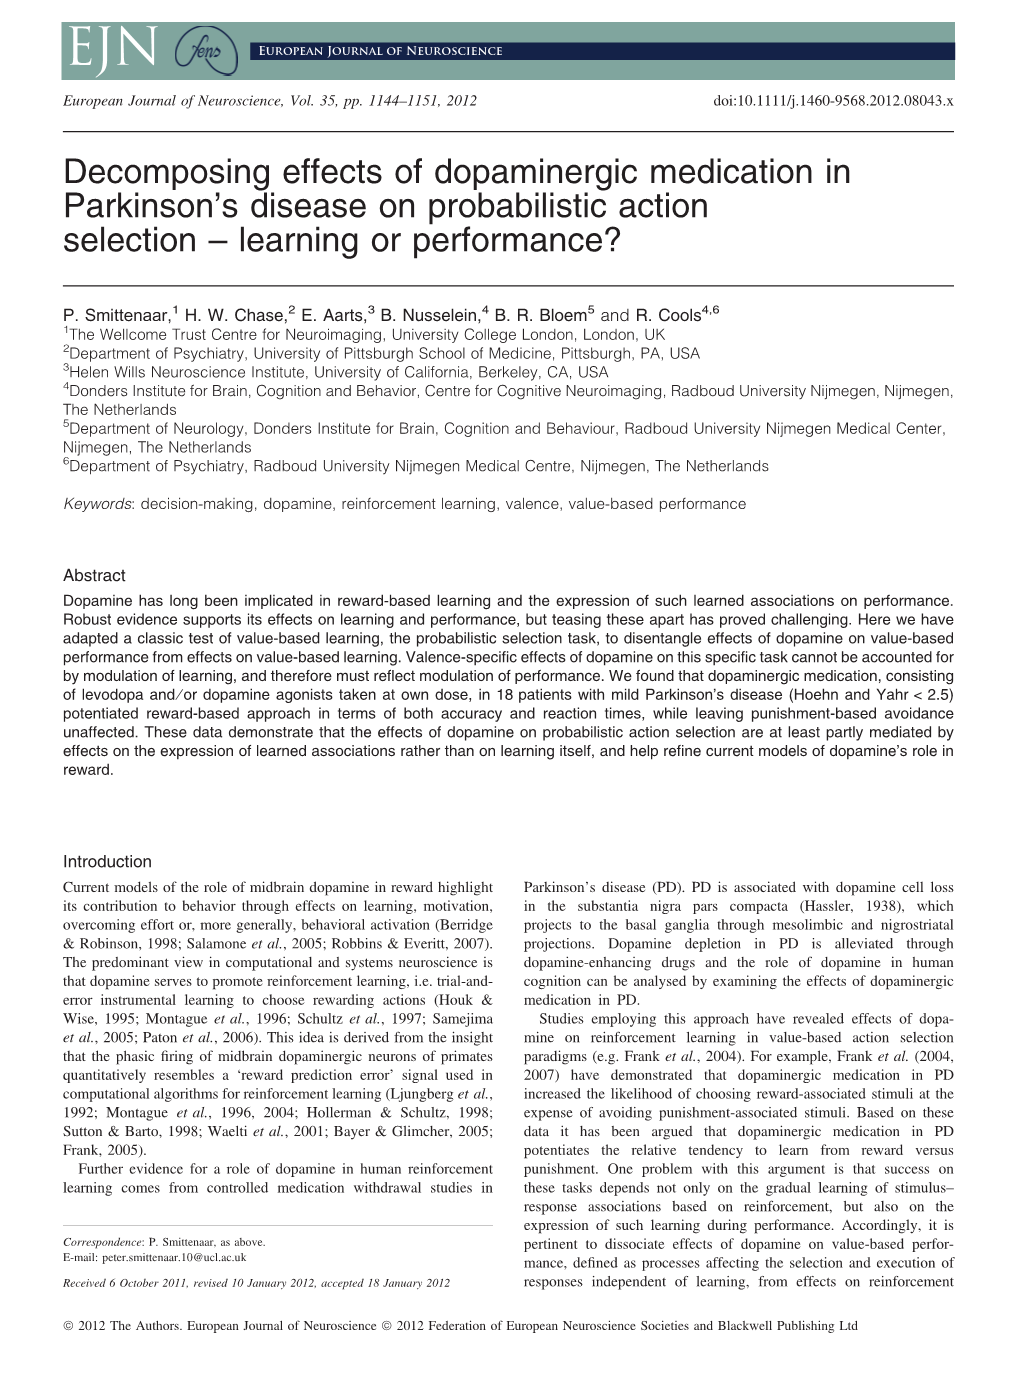 Decomposing Effects of Dopaminergic Medication in Parkinson’S Disease on Probabilistic Action Selection – Learning Or Performance?